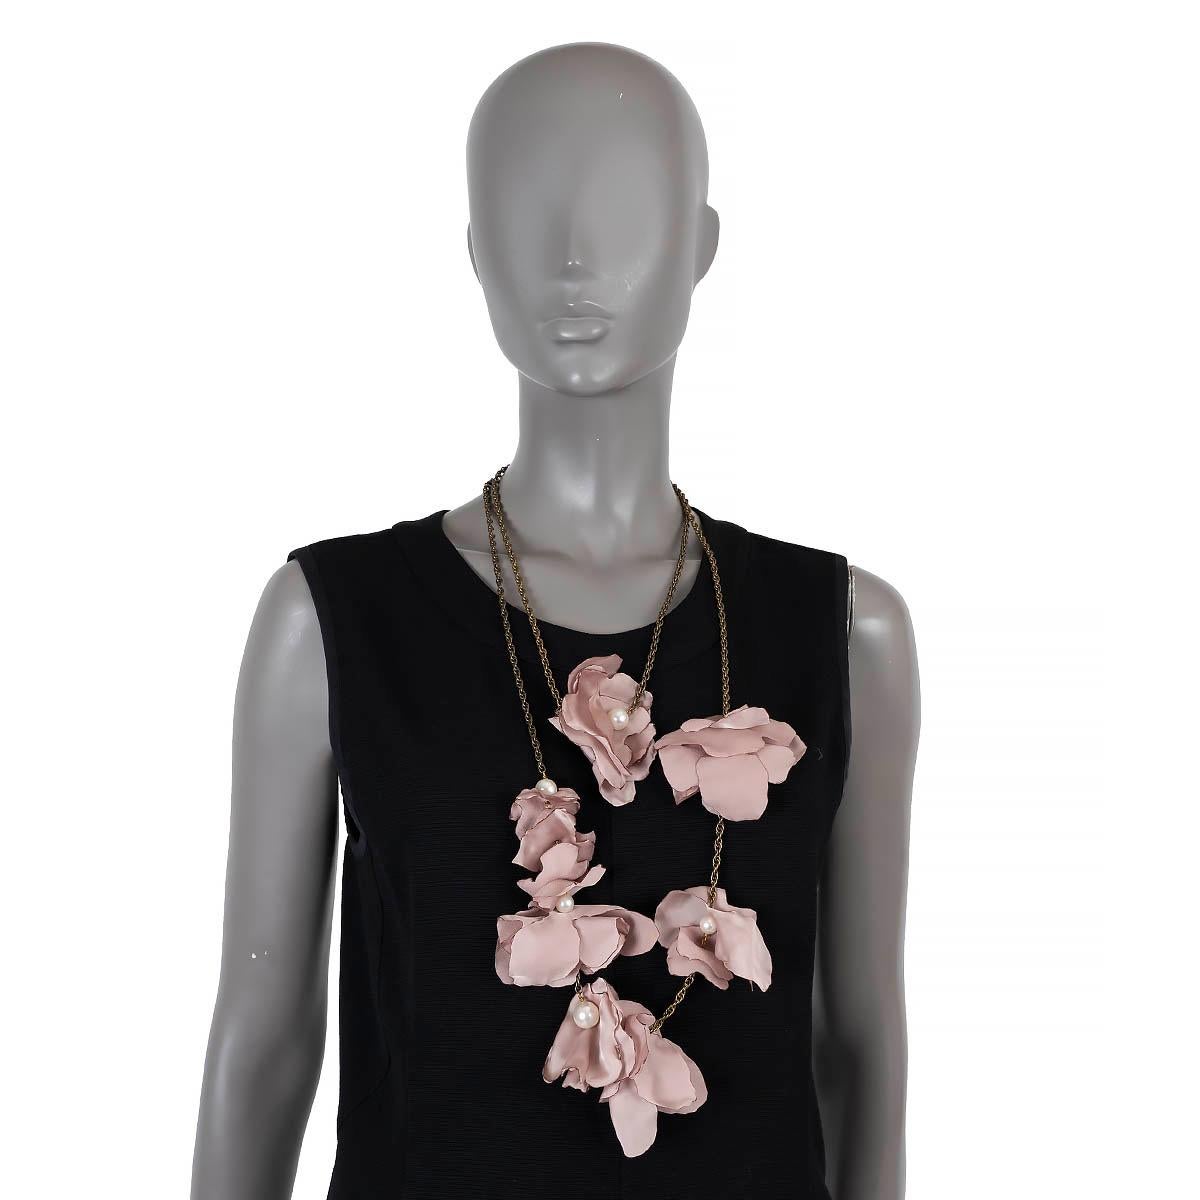 100% authentic Lanvin chain necklace in antique gold-tone with delicate blush pink silk flower petals and faux pearls. Has been worn and is in excellent condition. 

Measurements
Length	162cm (63.2in)
Hardware	Antique Gold-Tone

All our listings